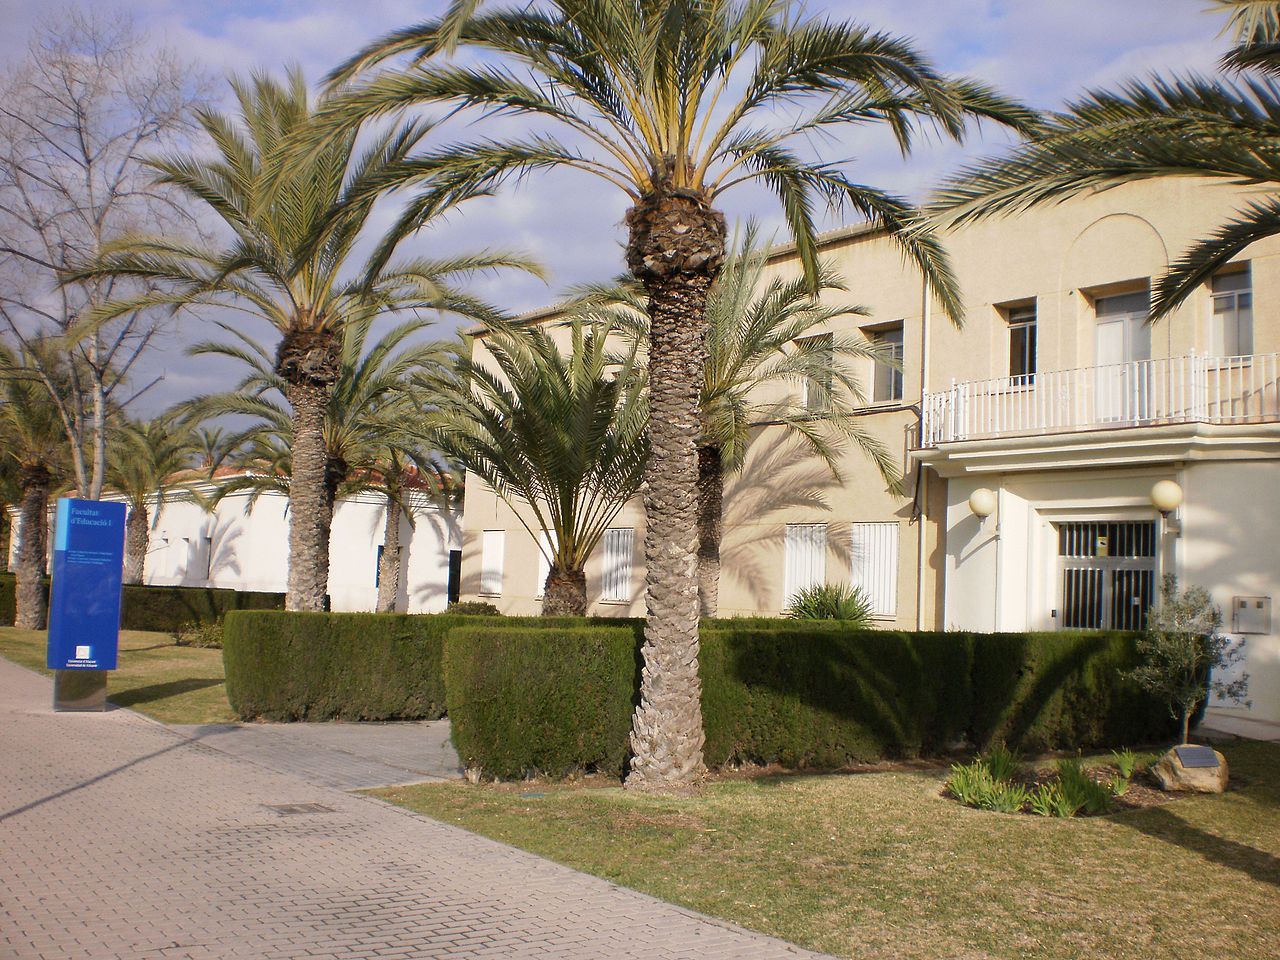 Campus of the University of Alicante